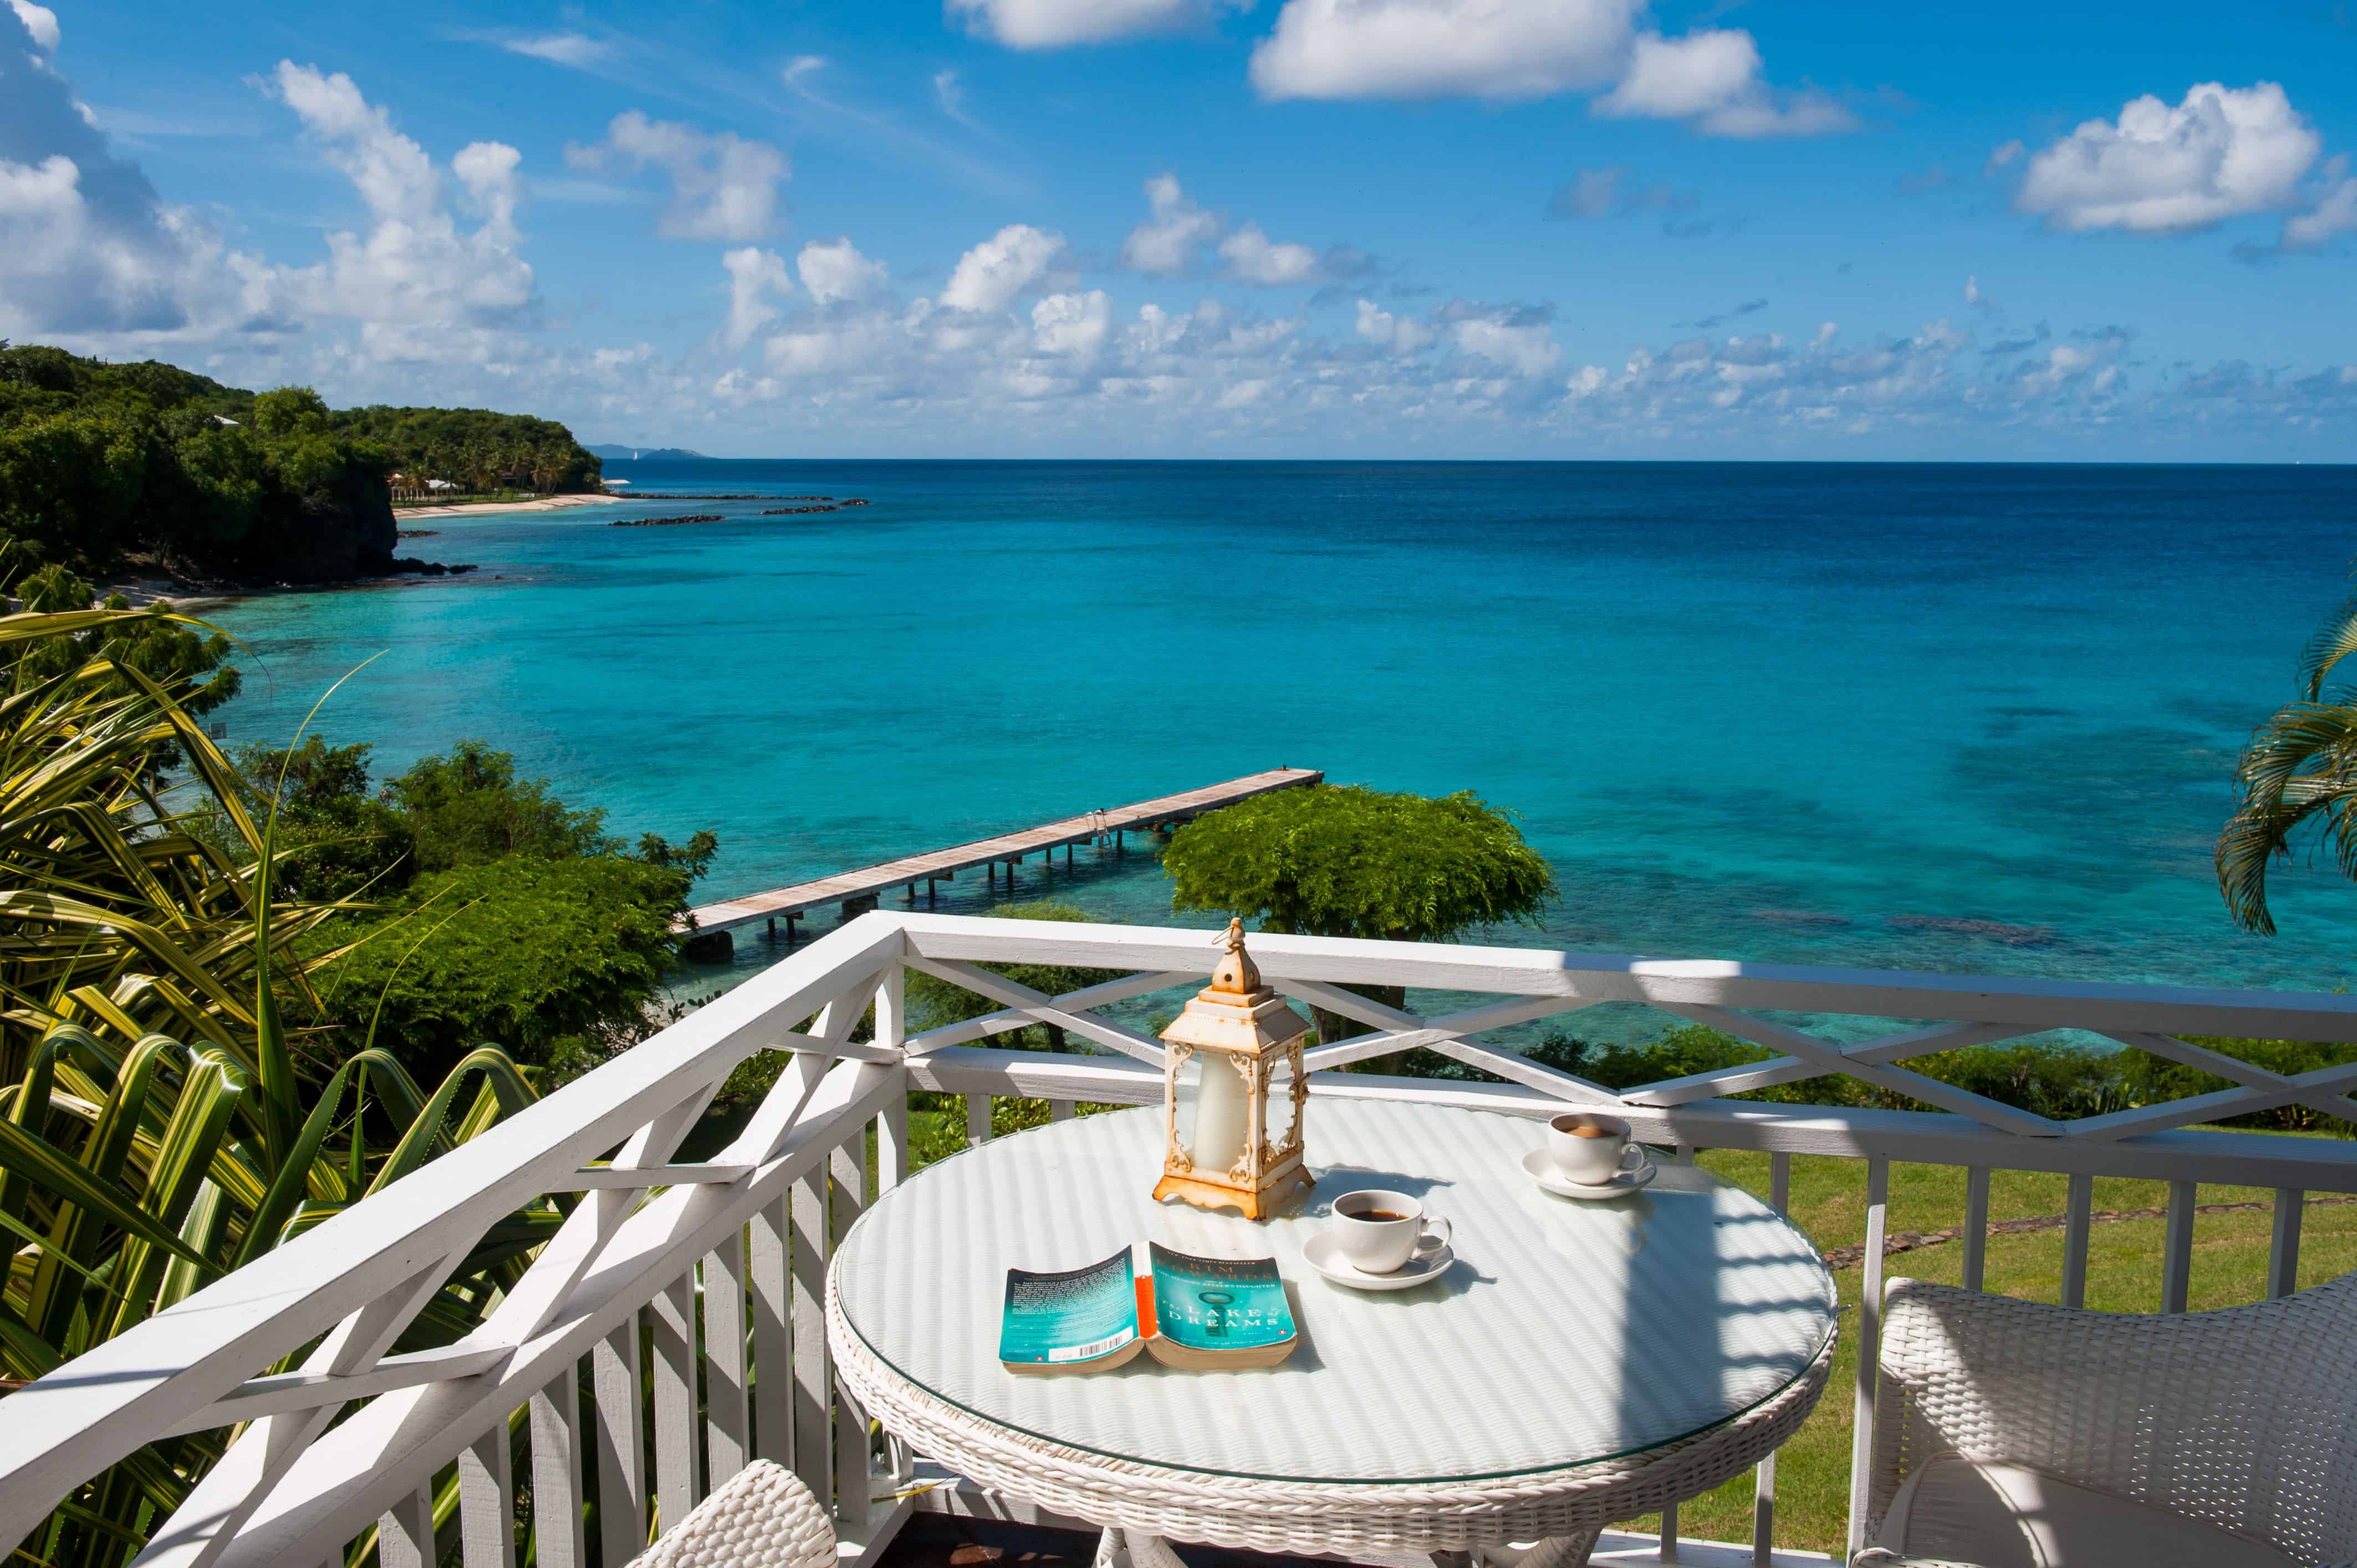 Five places you need to visit in the Caribbean